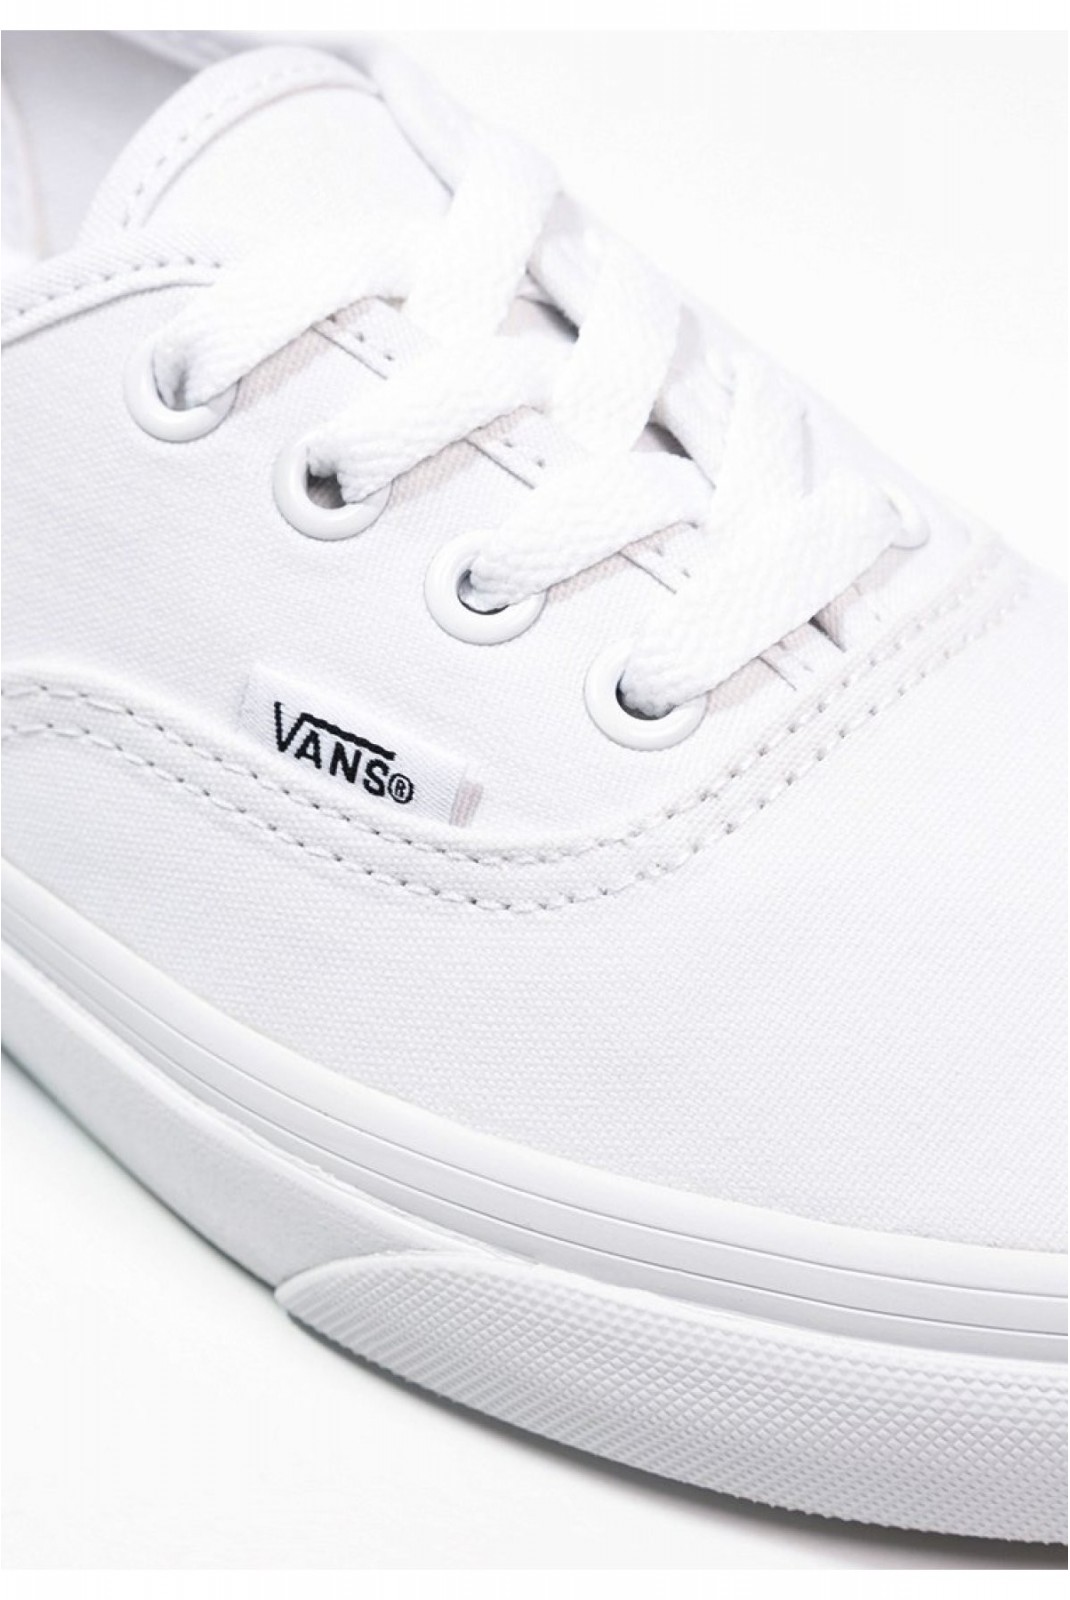 Baskets basses Authentic Vans white VN000EE3W001